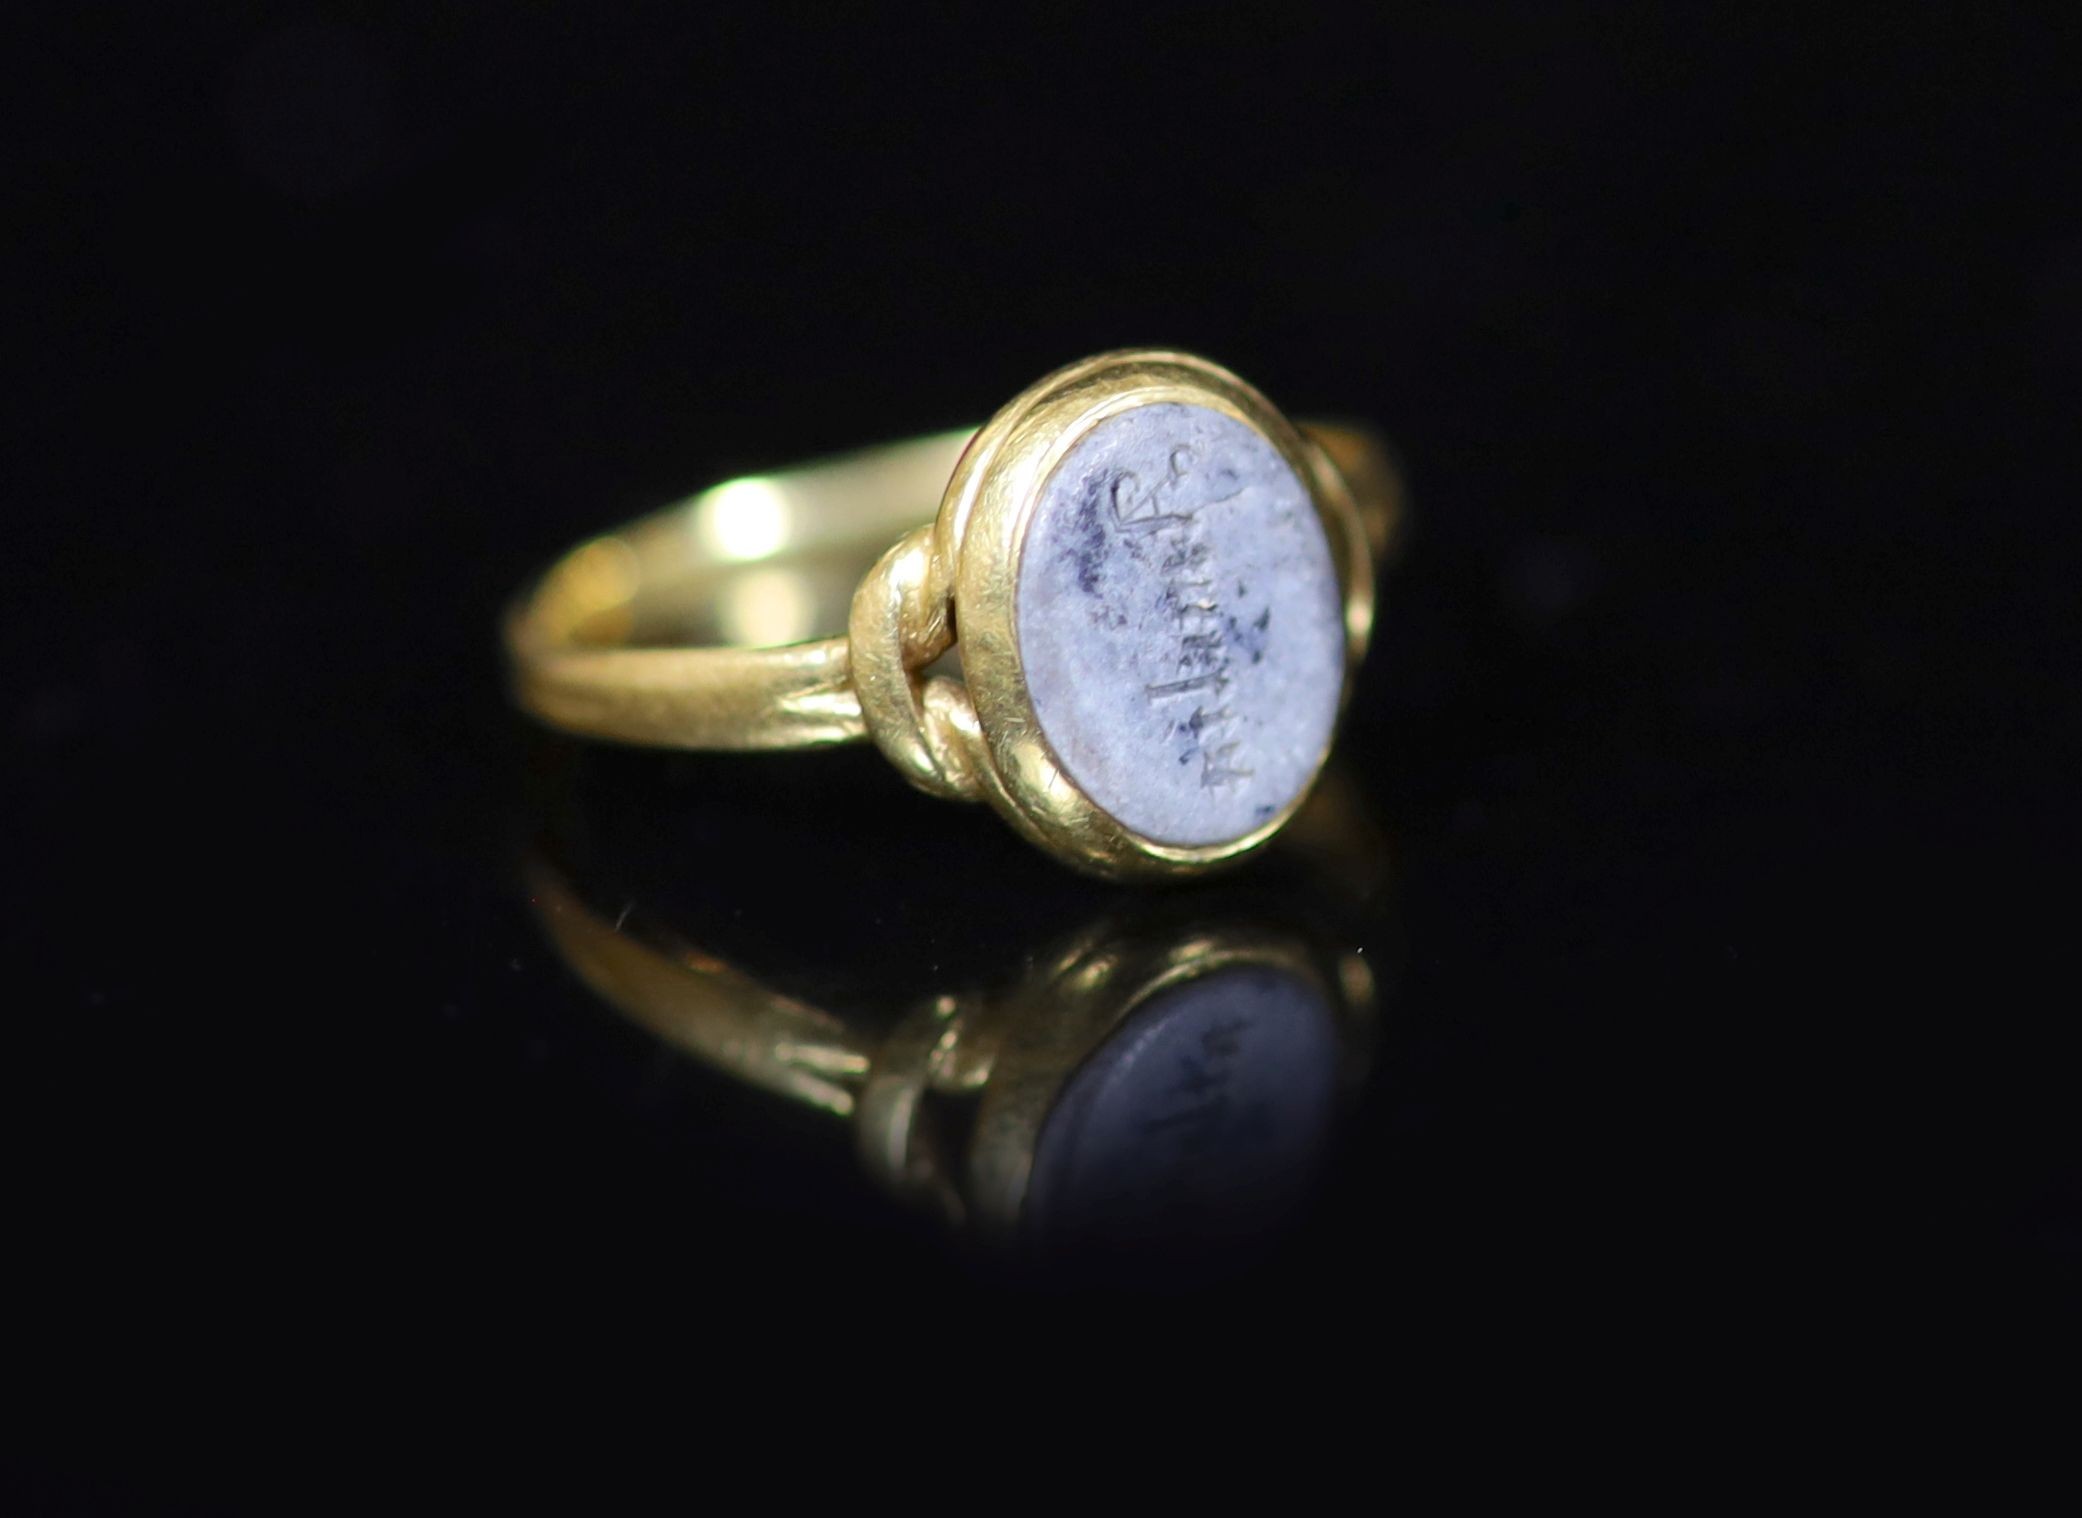 An antique gold and oval chalcedony set ring, carved with the name 'Amelia',size L, gross weight 2.3